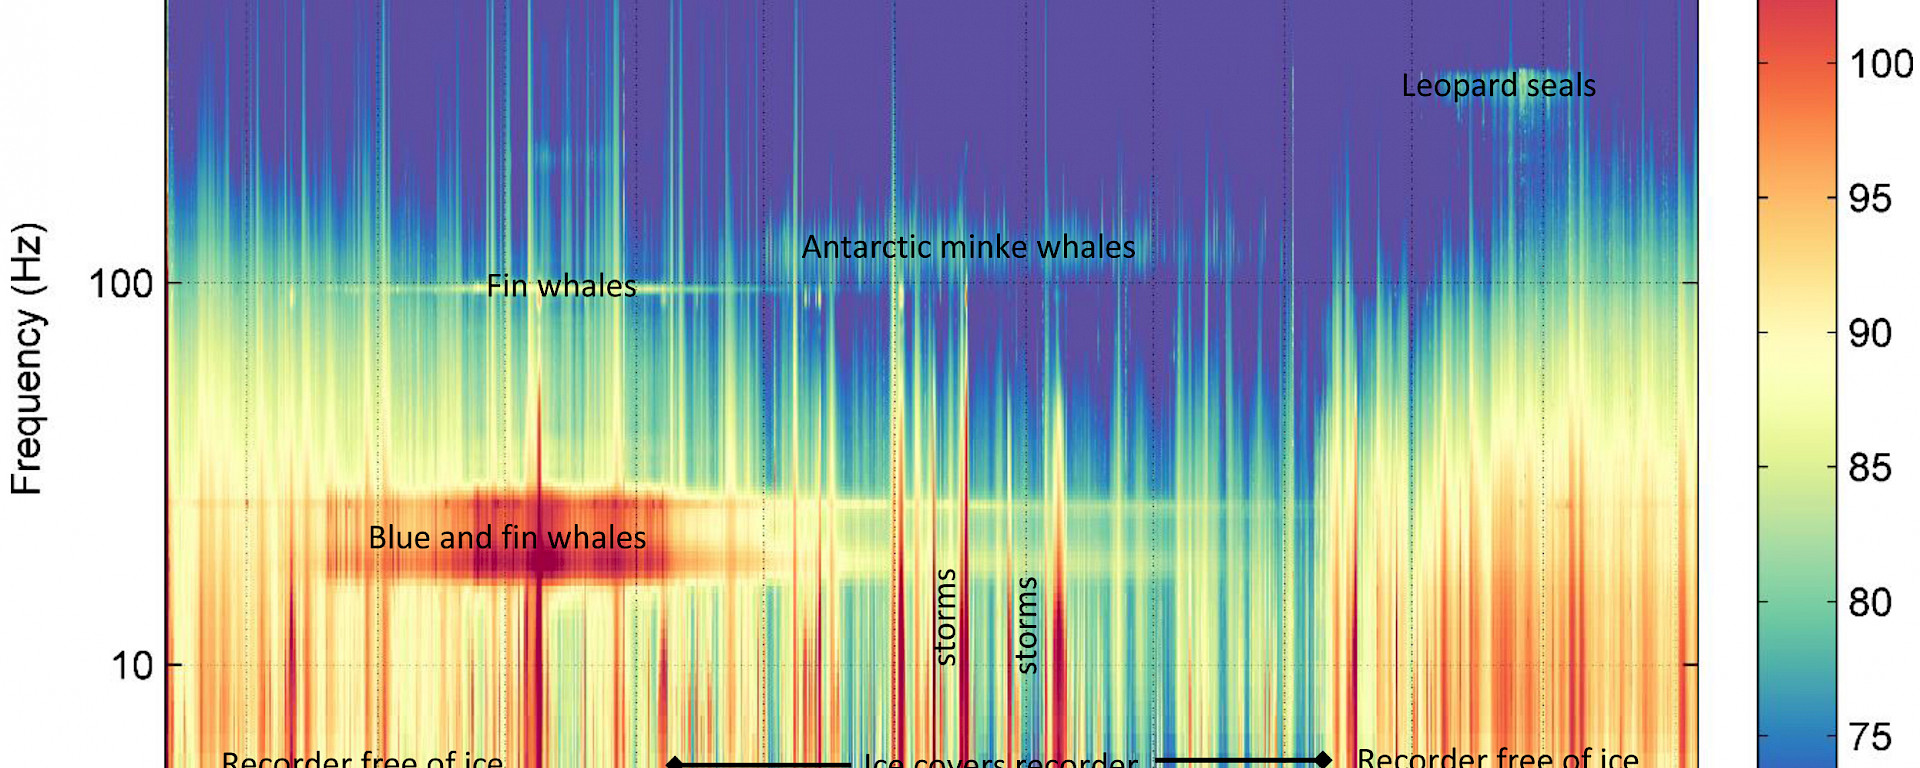 Graphic of sounds showing whale and seal calls.